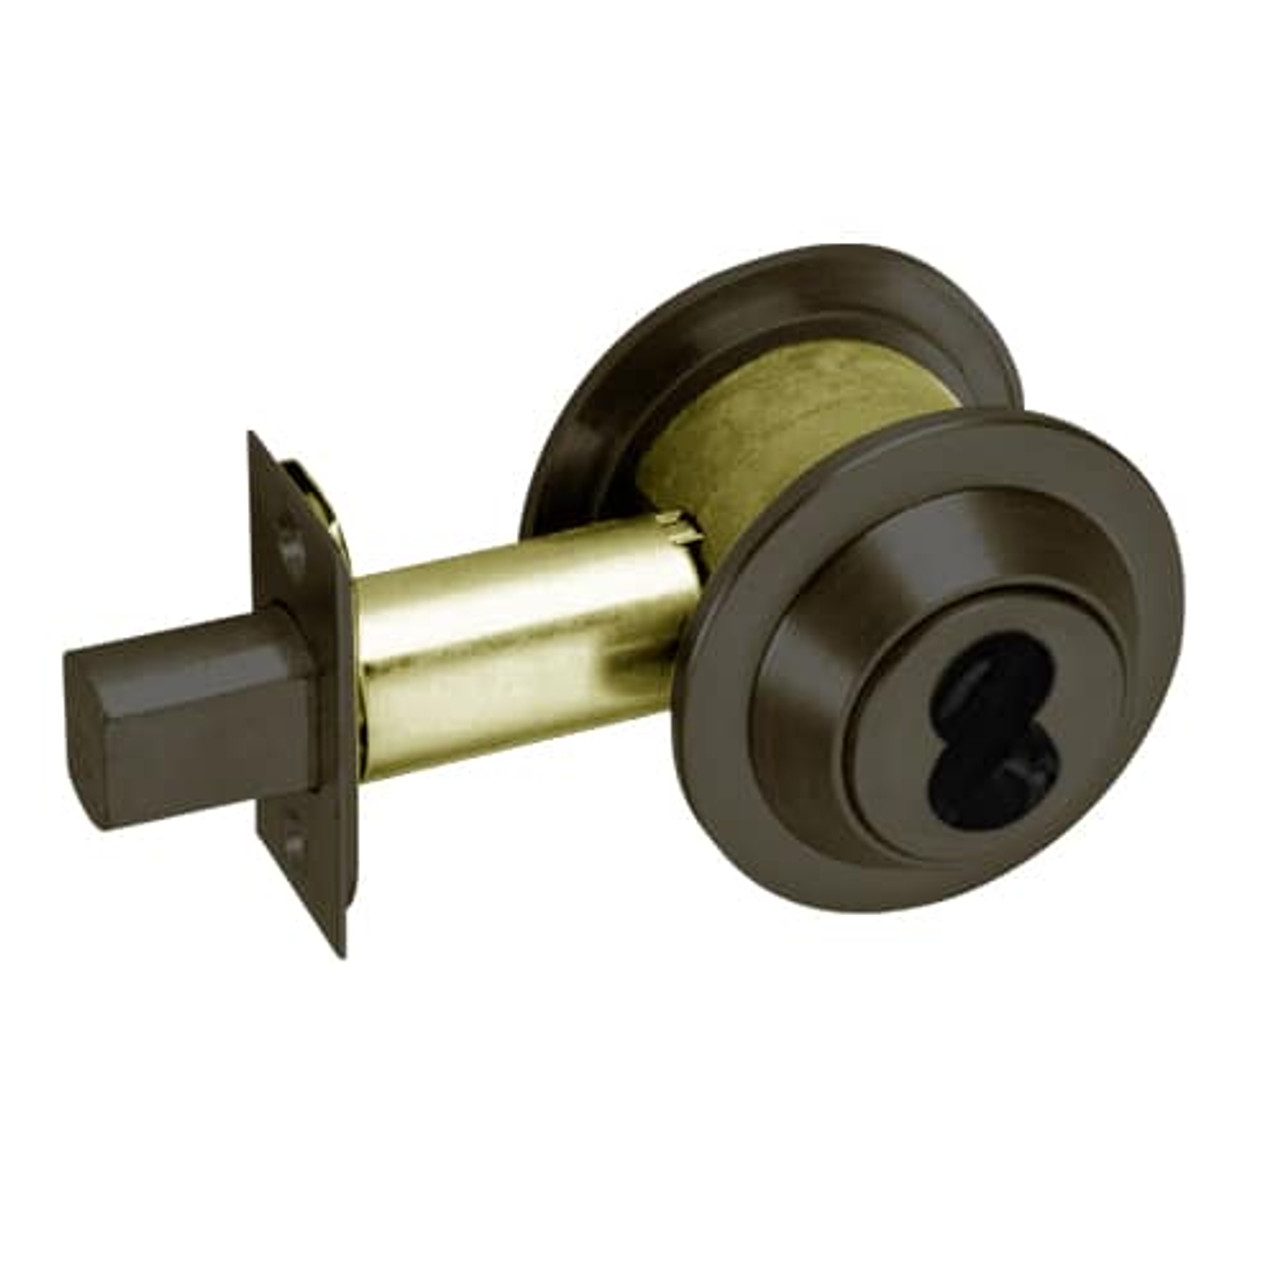 DL3017-613-LH-CL6 Corbin DL3000 Series IC 6-Pin Less Core Classroom Cylindrical Deadlocks with Single Cylinder in Oil Rubbed Bronze Finish